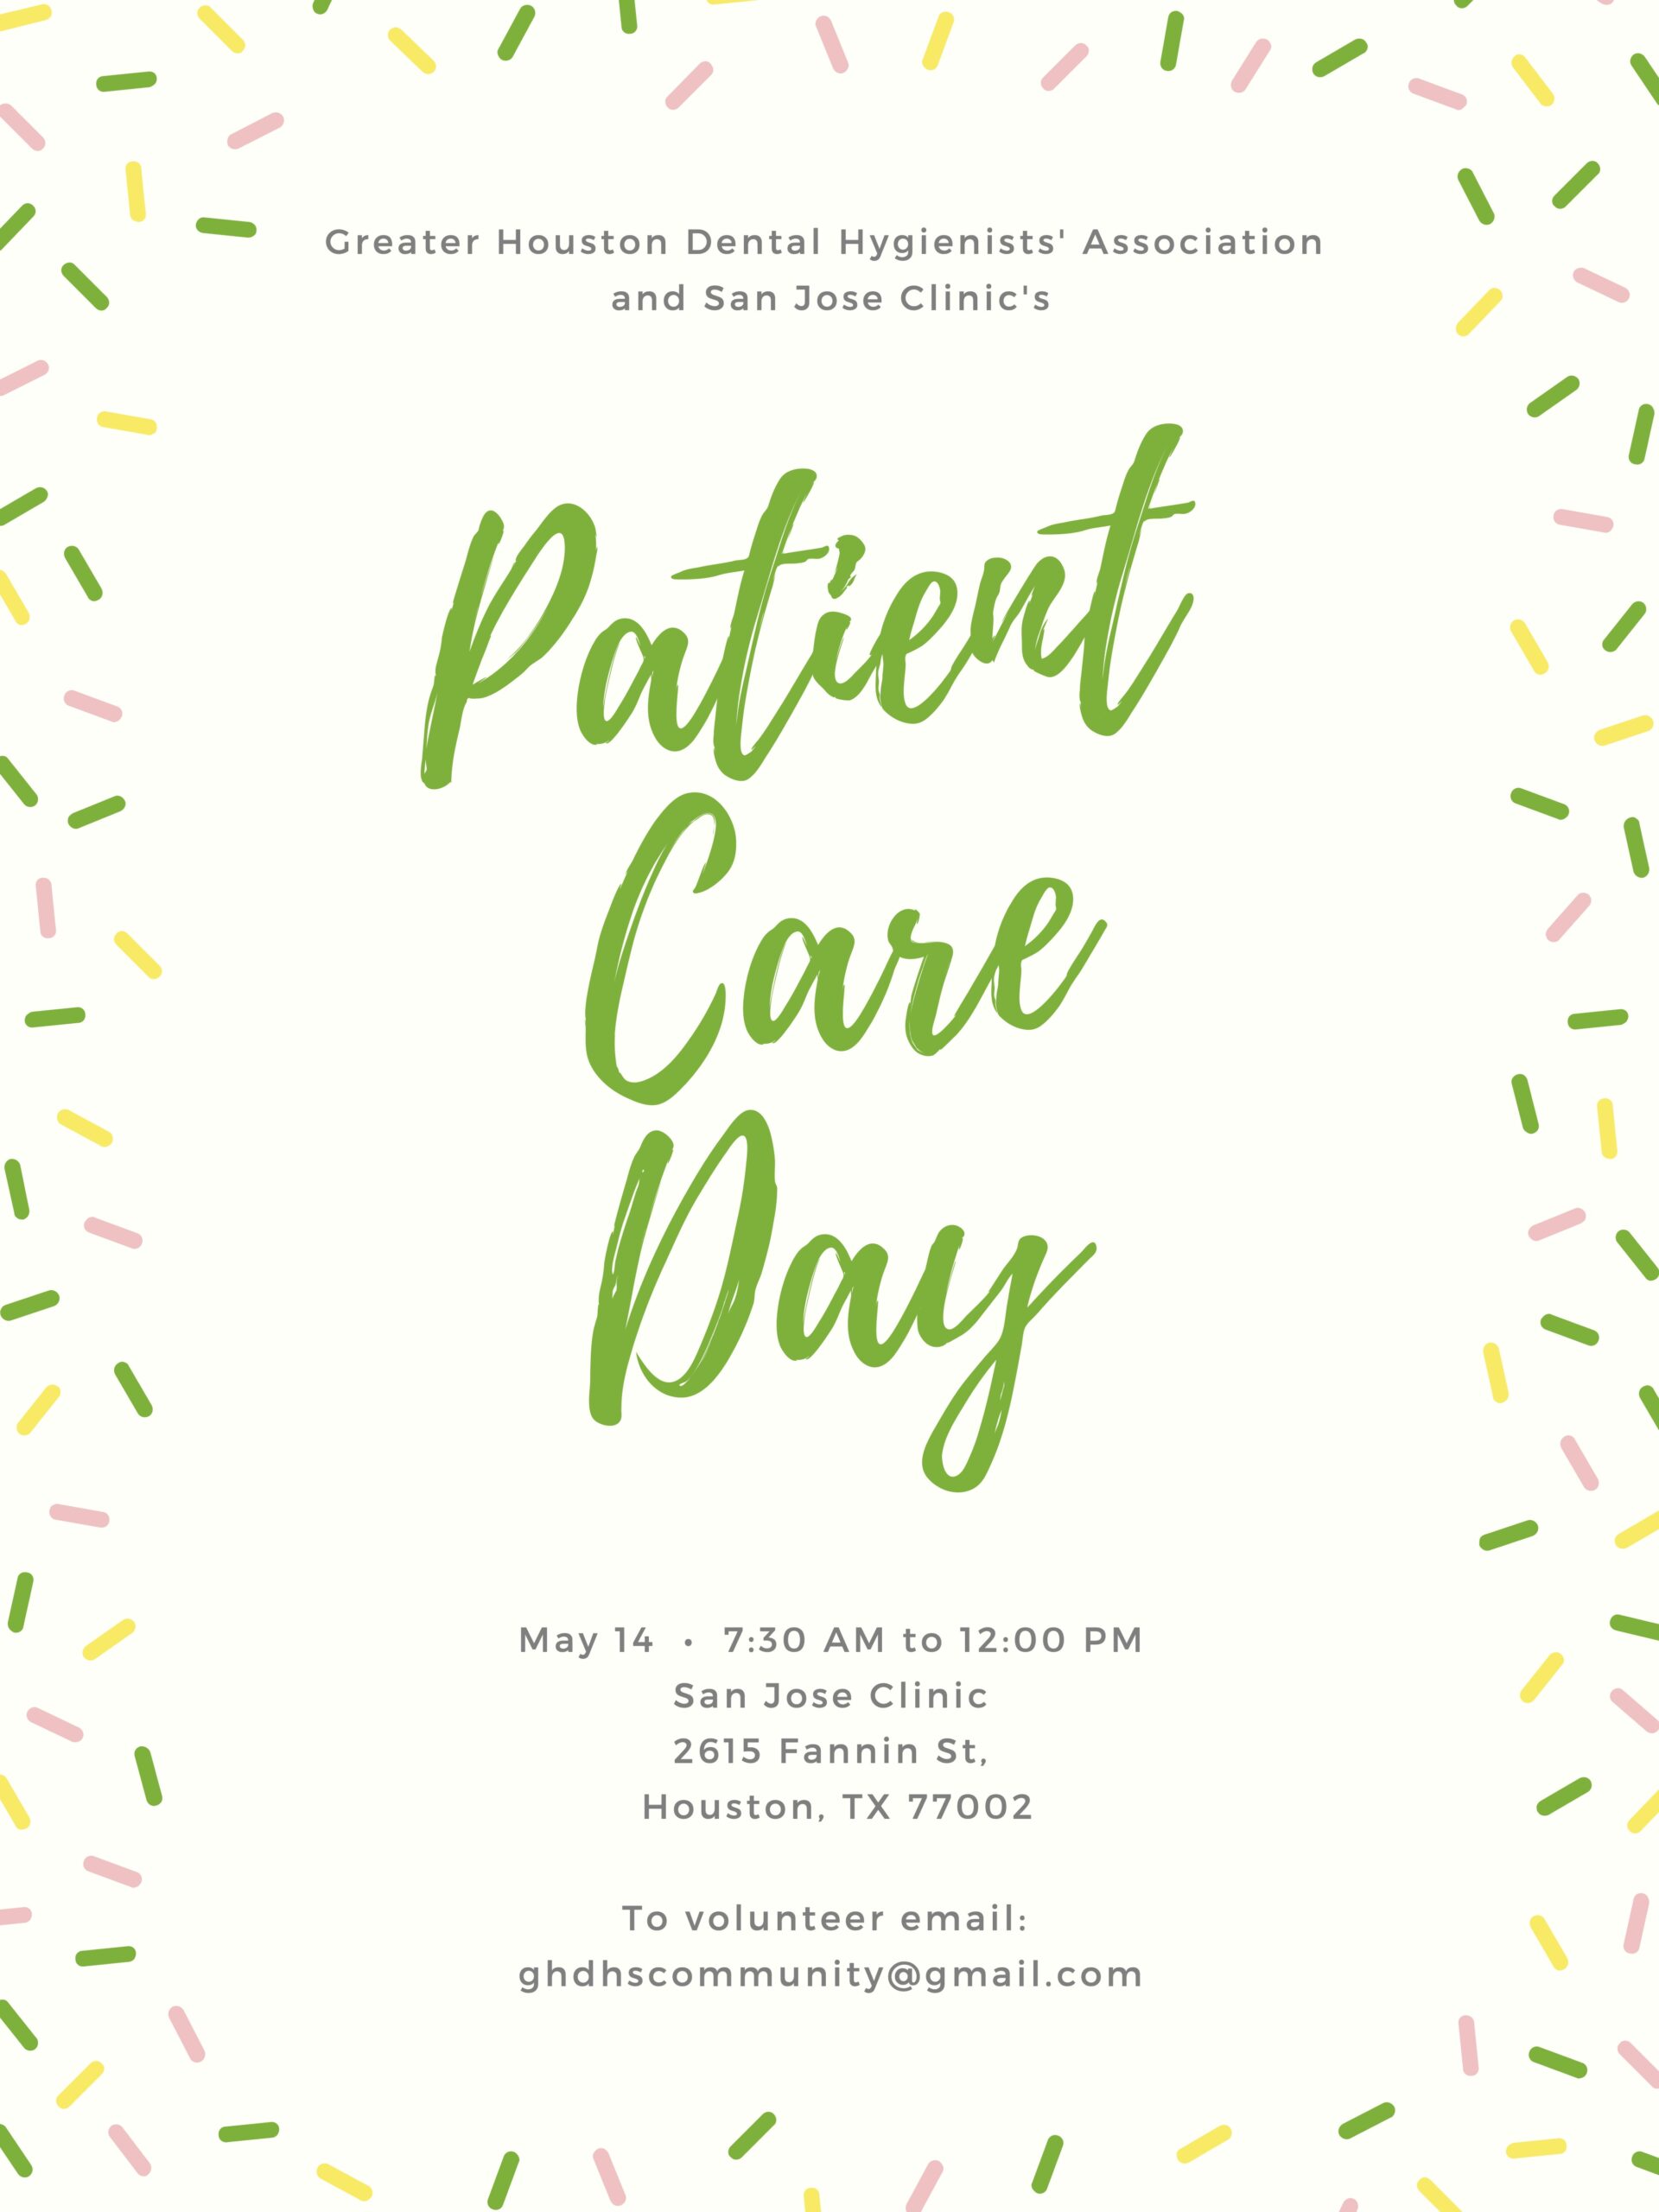 GHDHA & San Jose: Patient Care Day 5/14/22